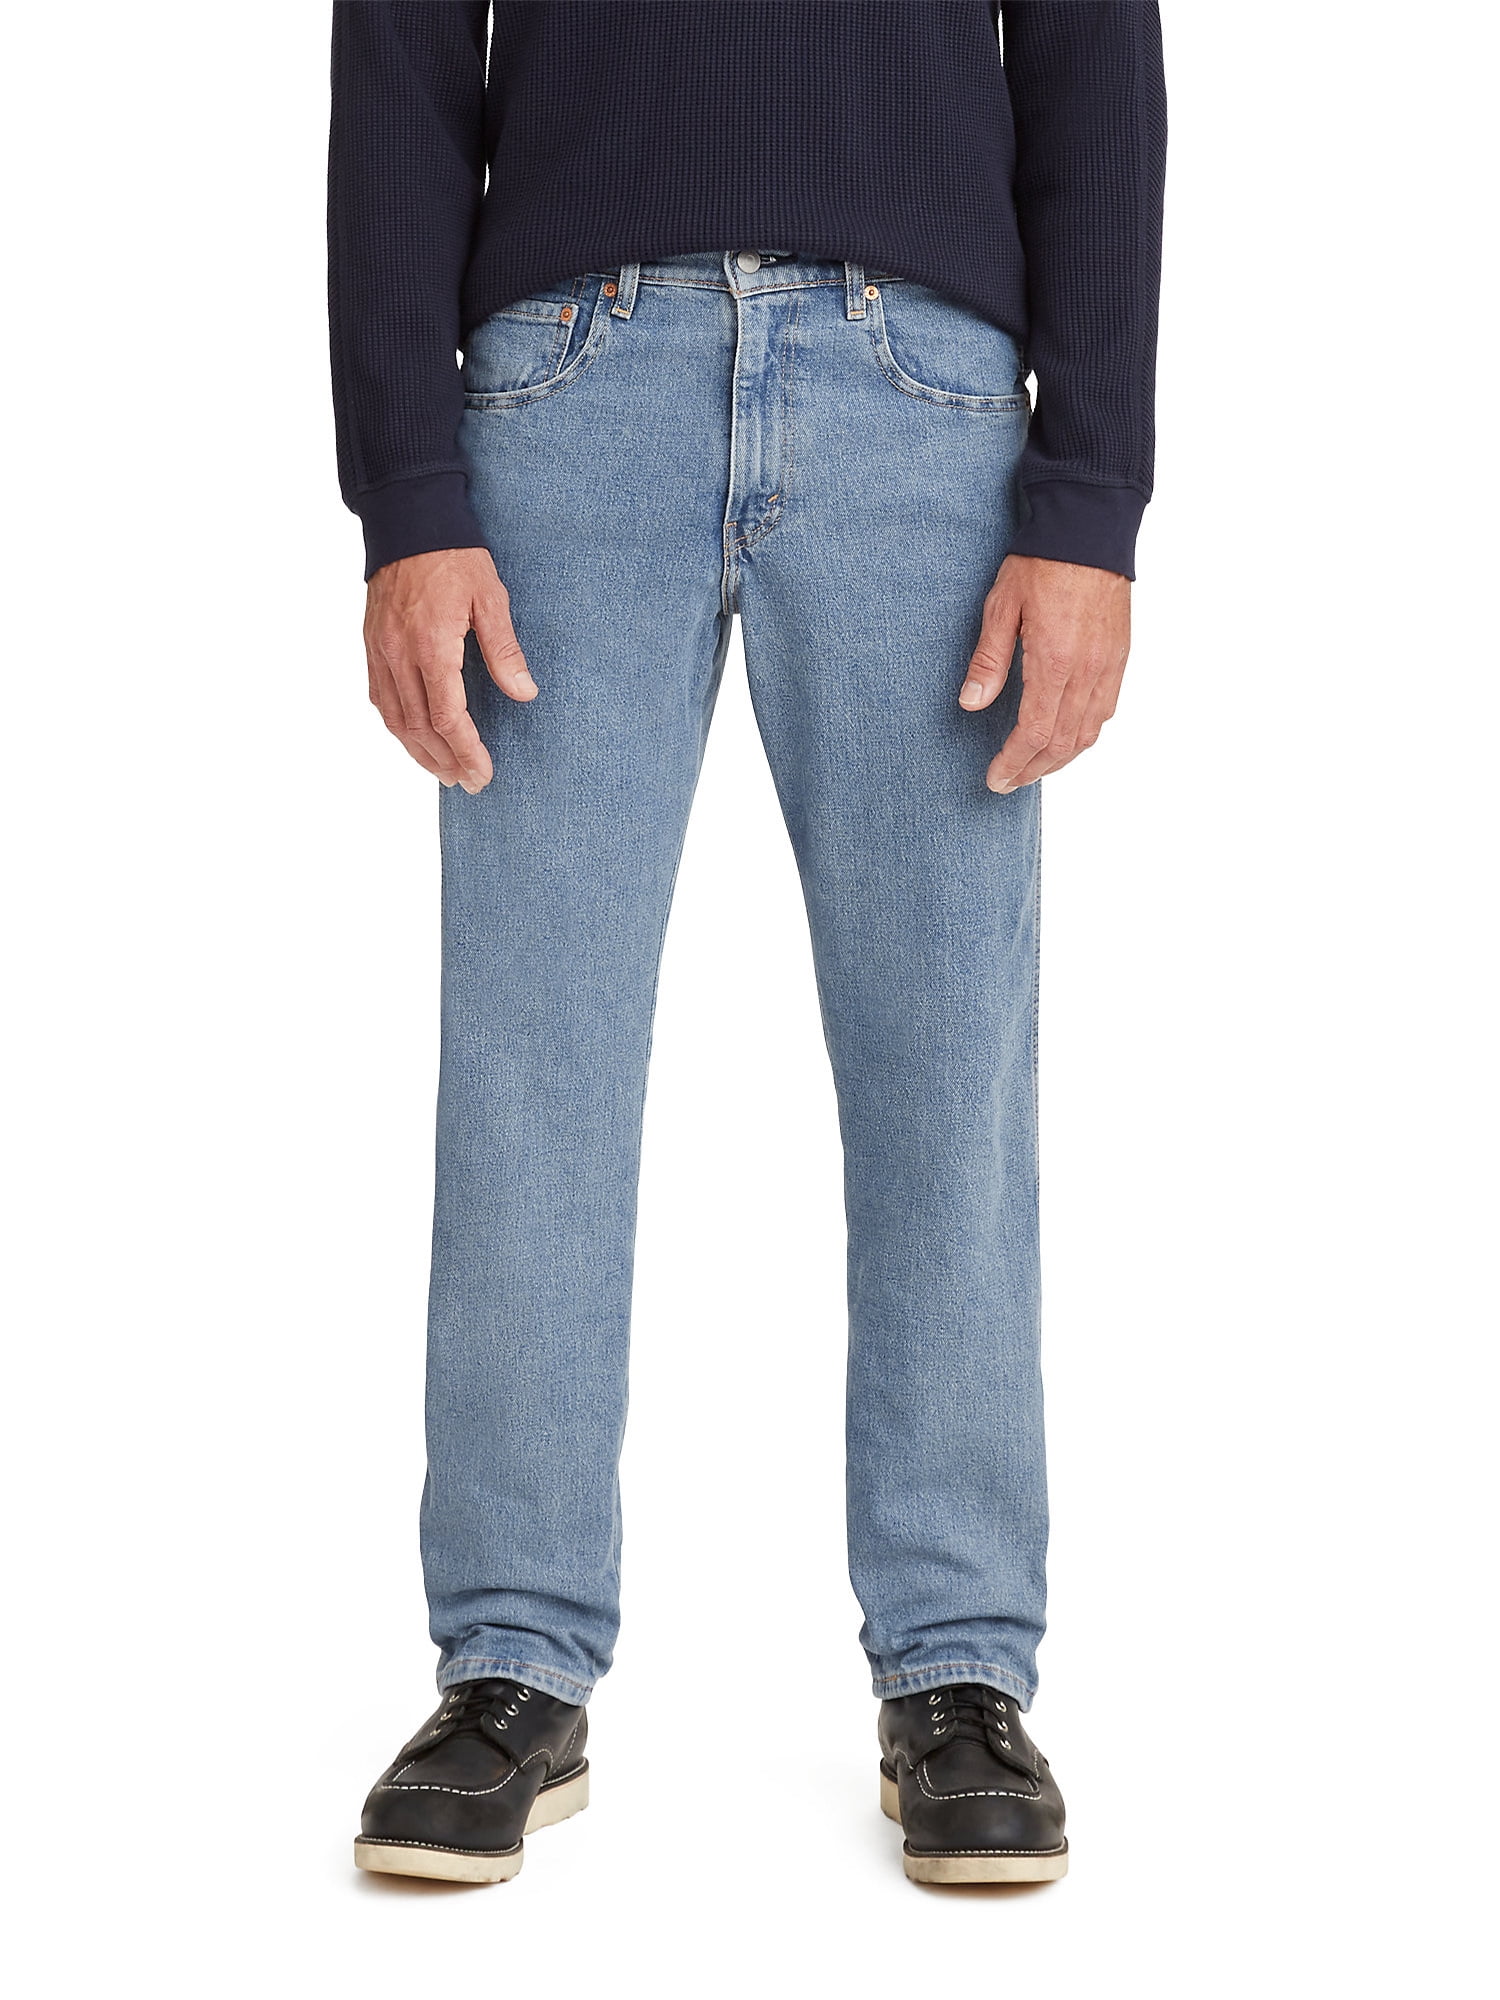 Levi's Men's Relaxed Western Fit Jeans - Walmart.com